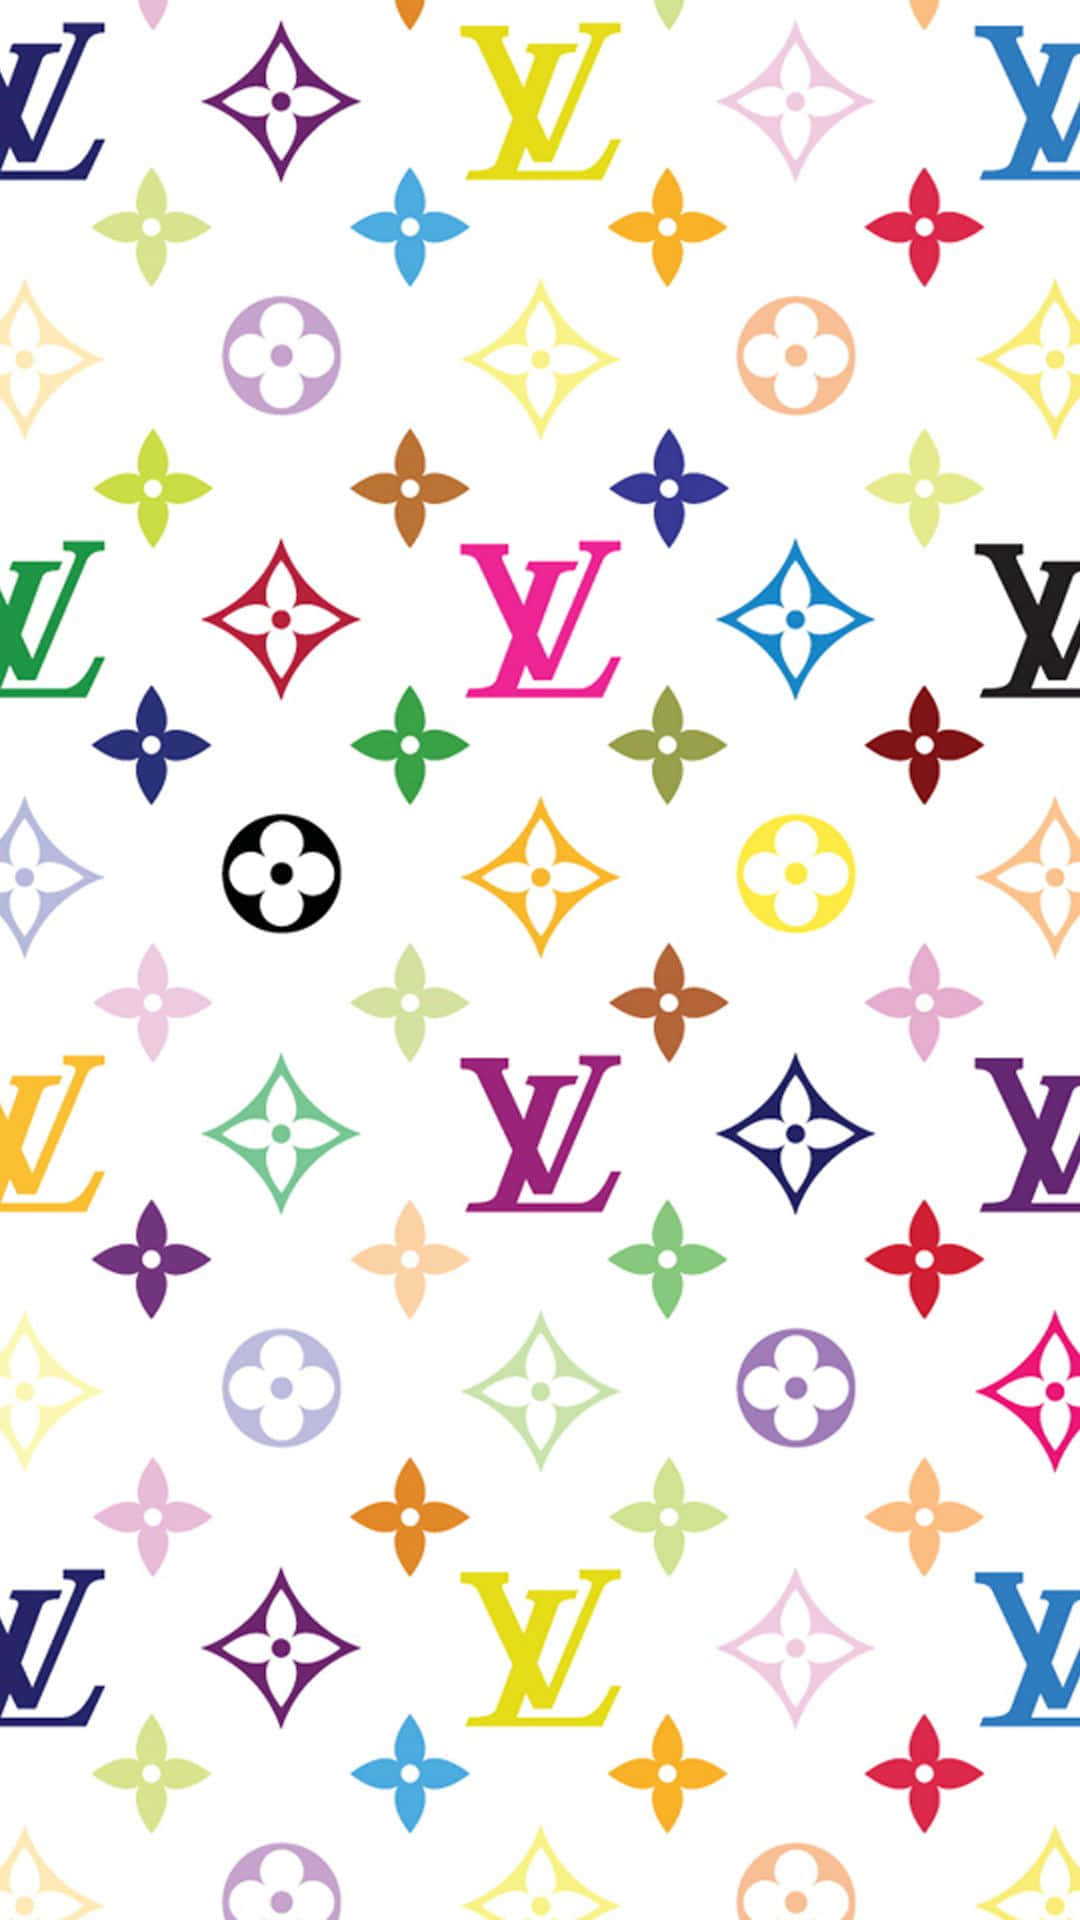 Take stylish accessorizing to the next level with Louis Vuitton and the iPhone Wallpaper